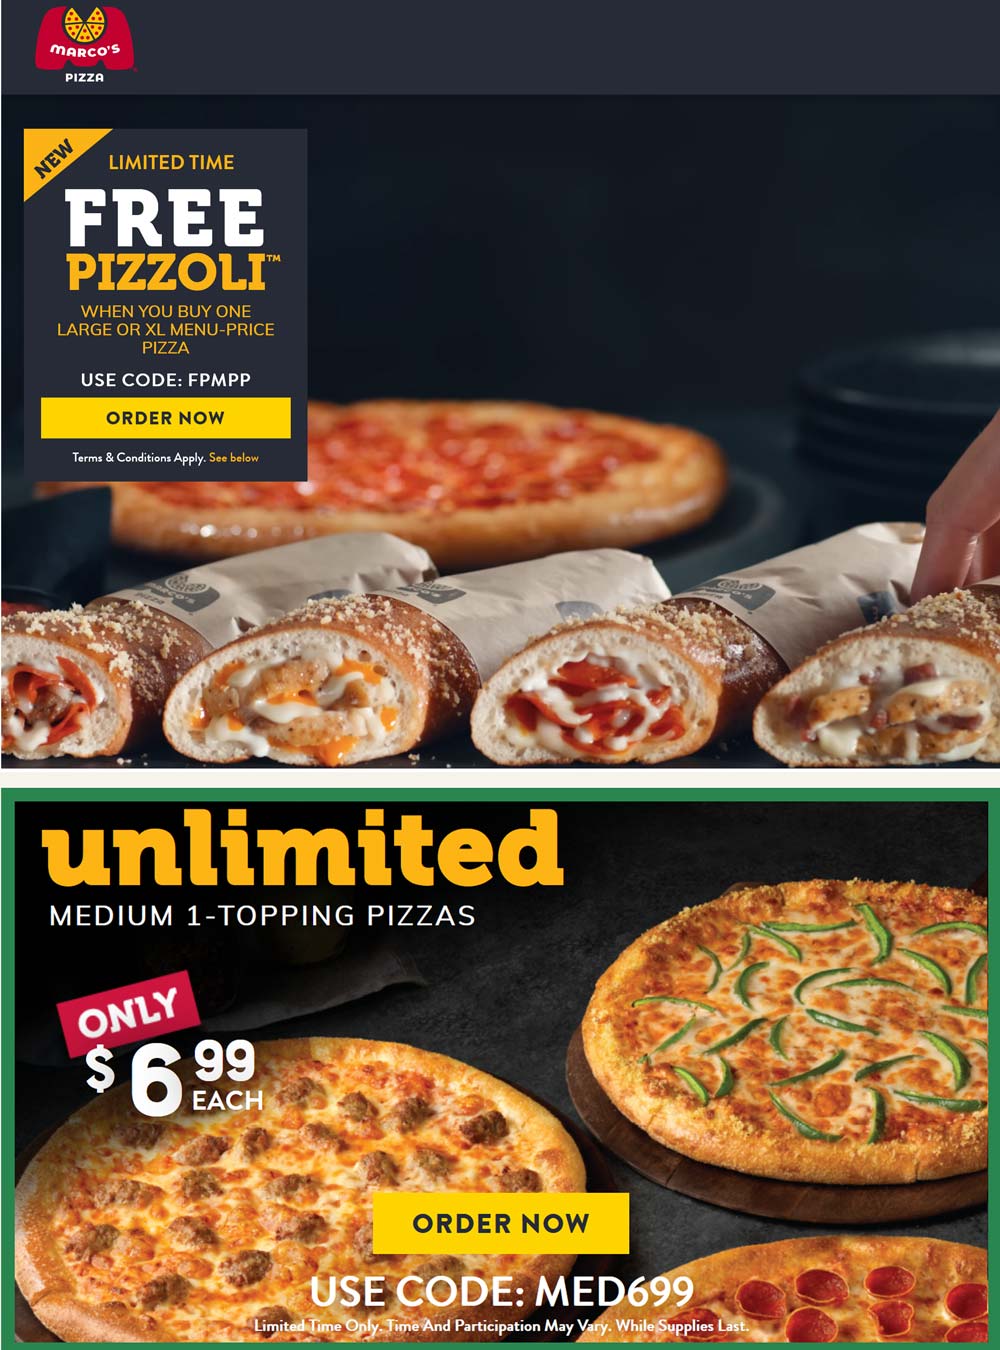 Marcos restaurants Coupon  Free pizzoli with your large at Marcos Pizza via promo code FPMPP #marcos 